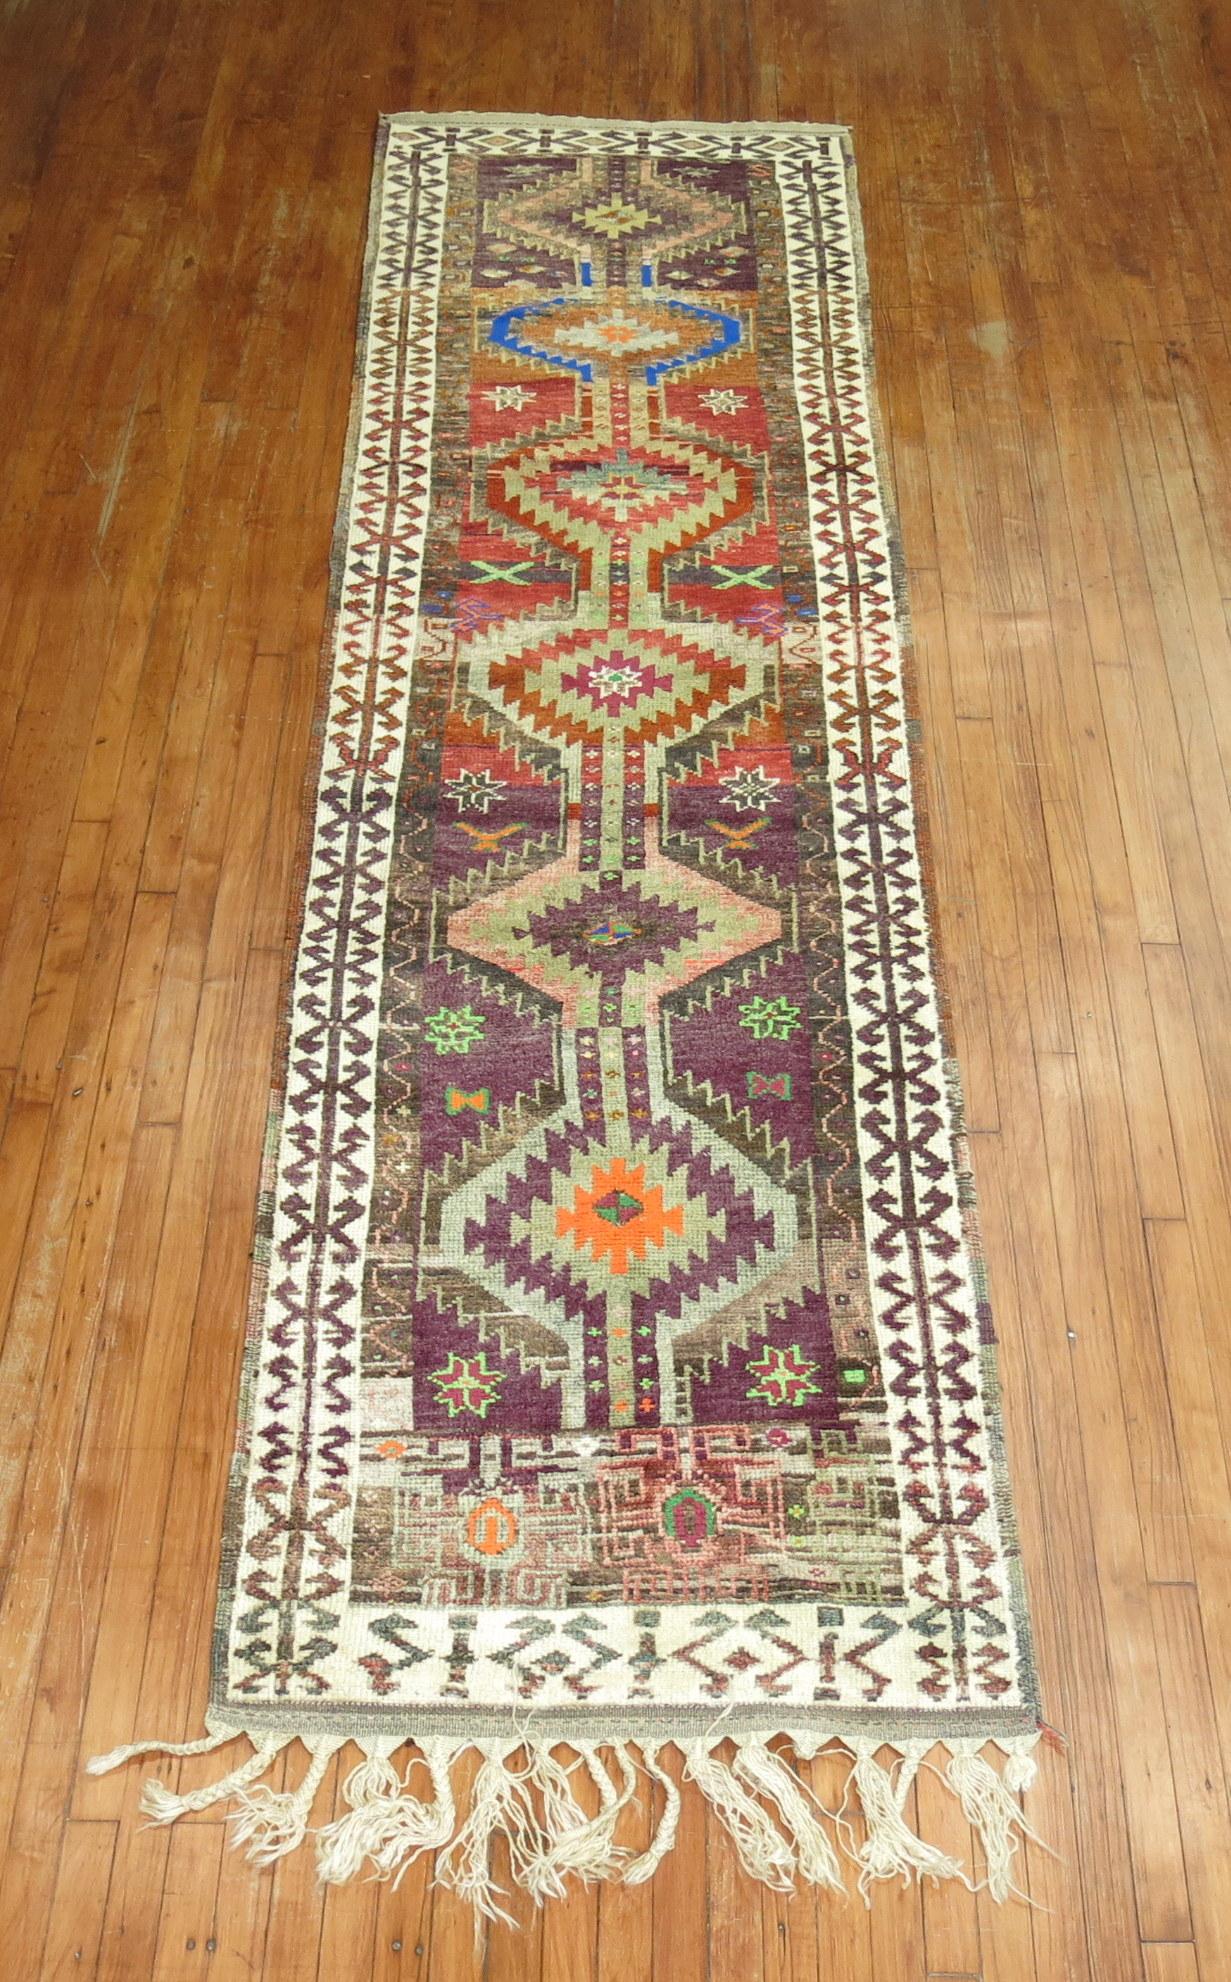 One of a kind colorful 20th century handwoven Turkish runner. Professionally washed and personally vetted. Ready for everyday use.